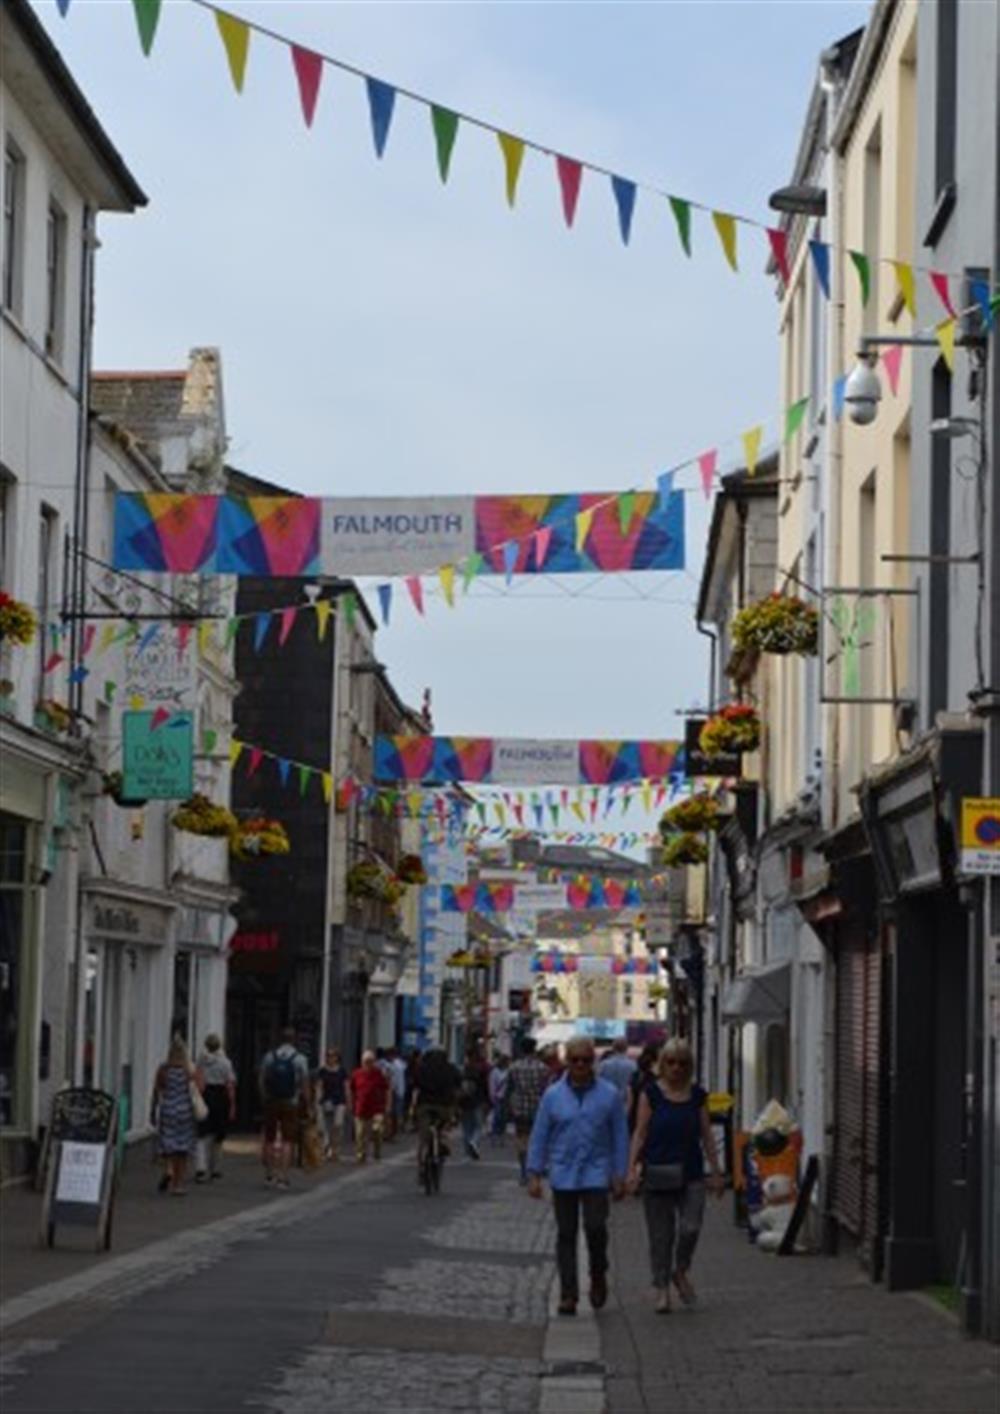 Falmouth town has an array of shops, plus a range of restaurants, cafes and art galleries at Riverside in Helford Passage